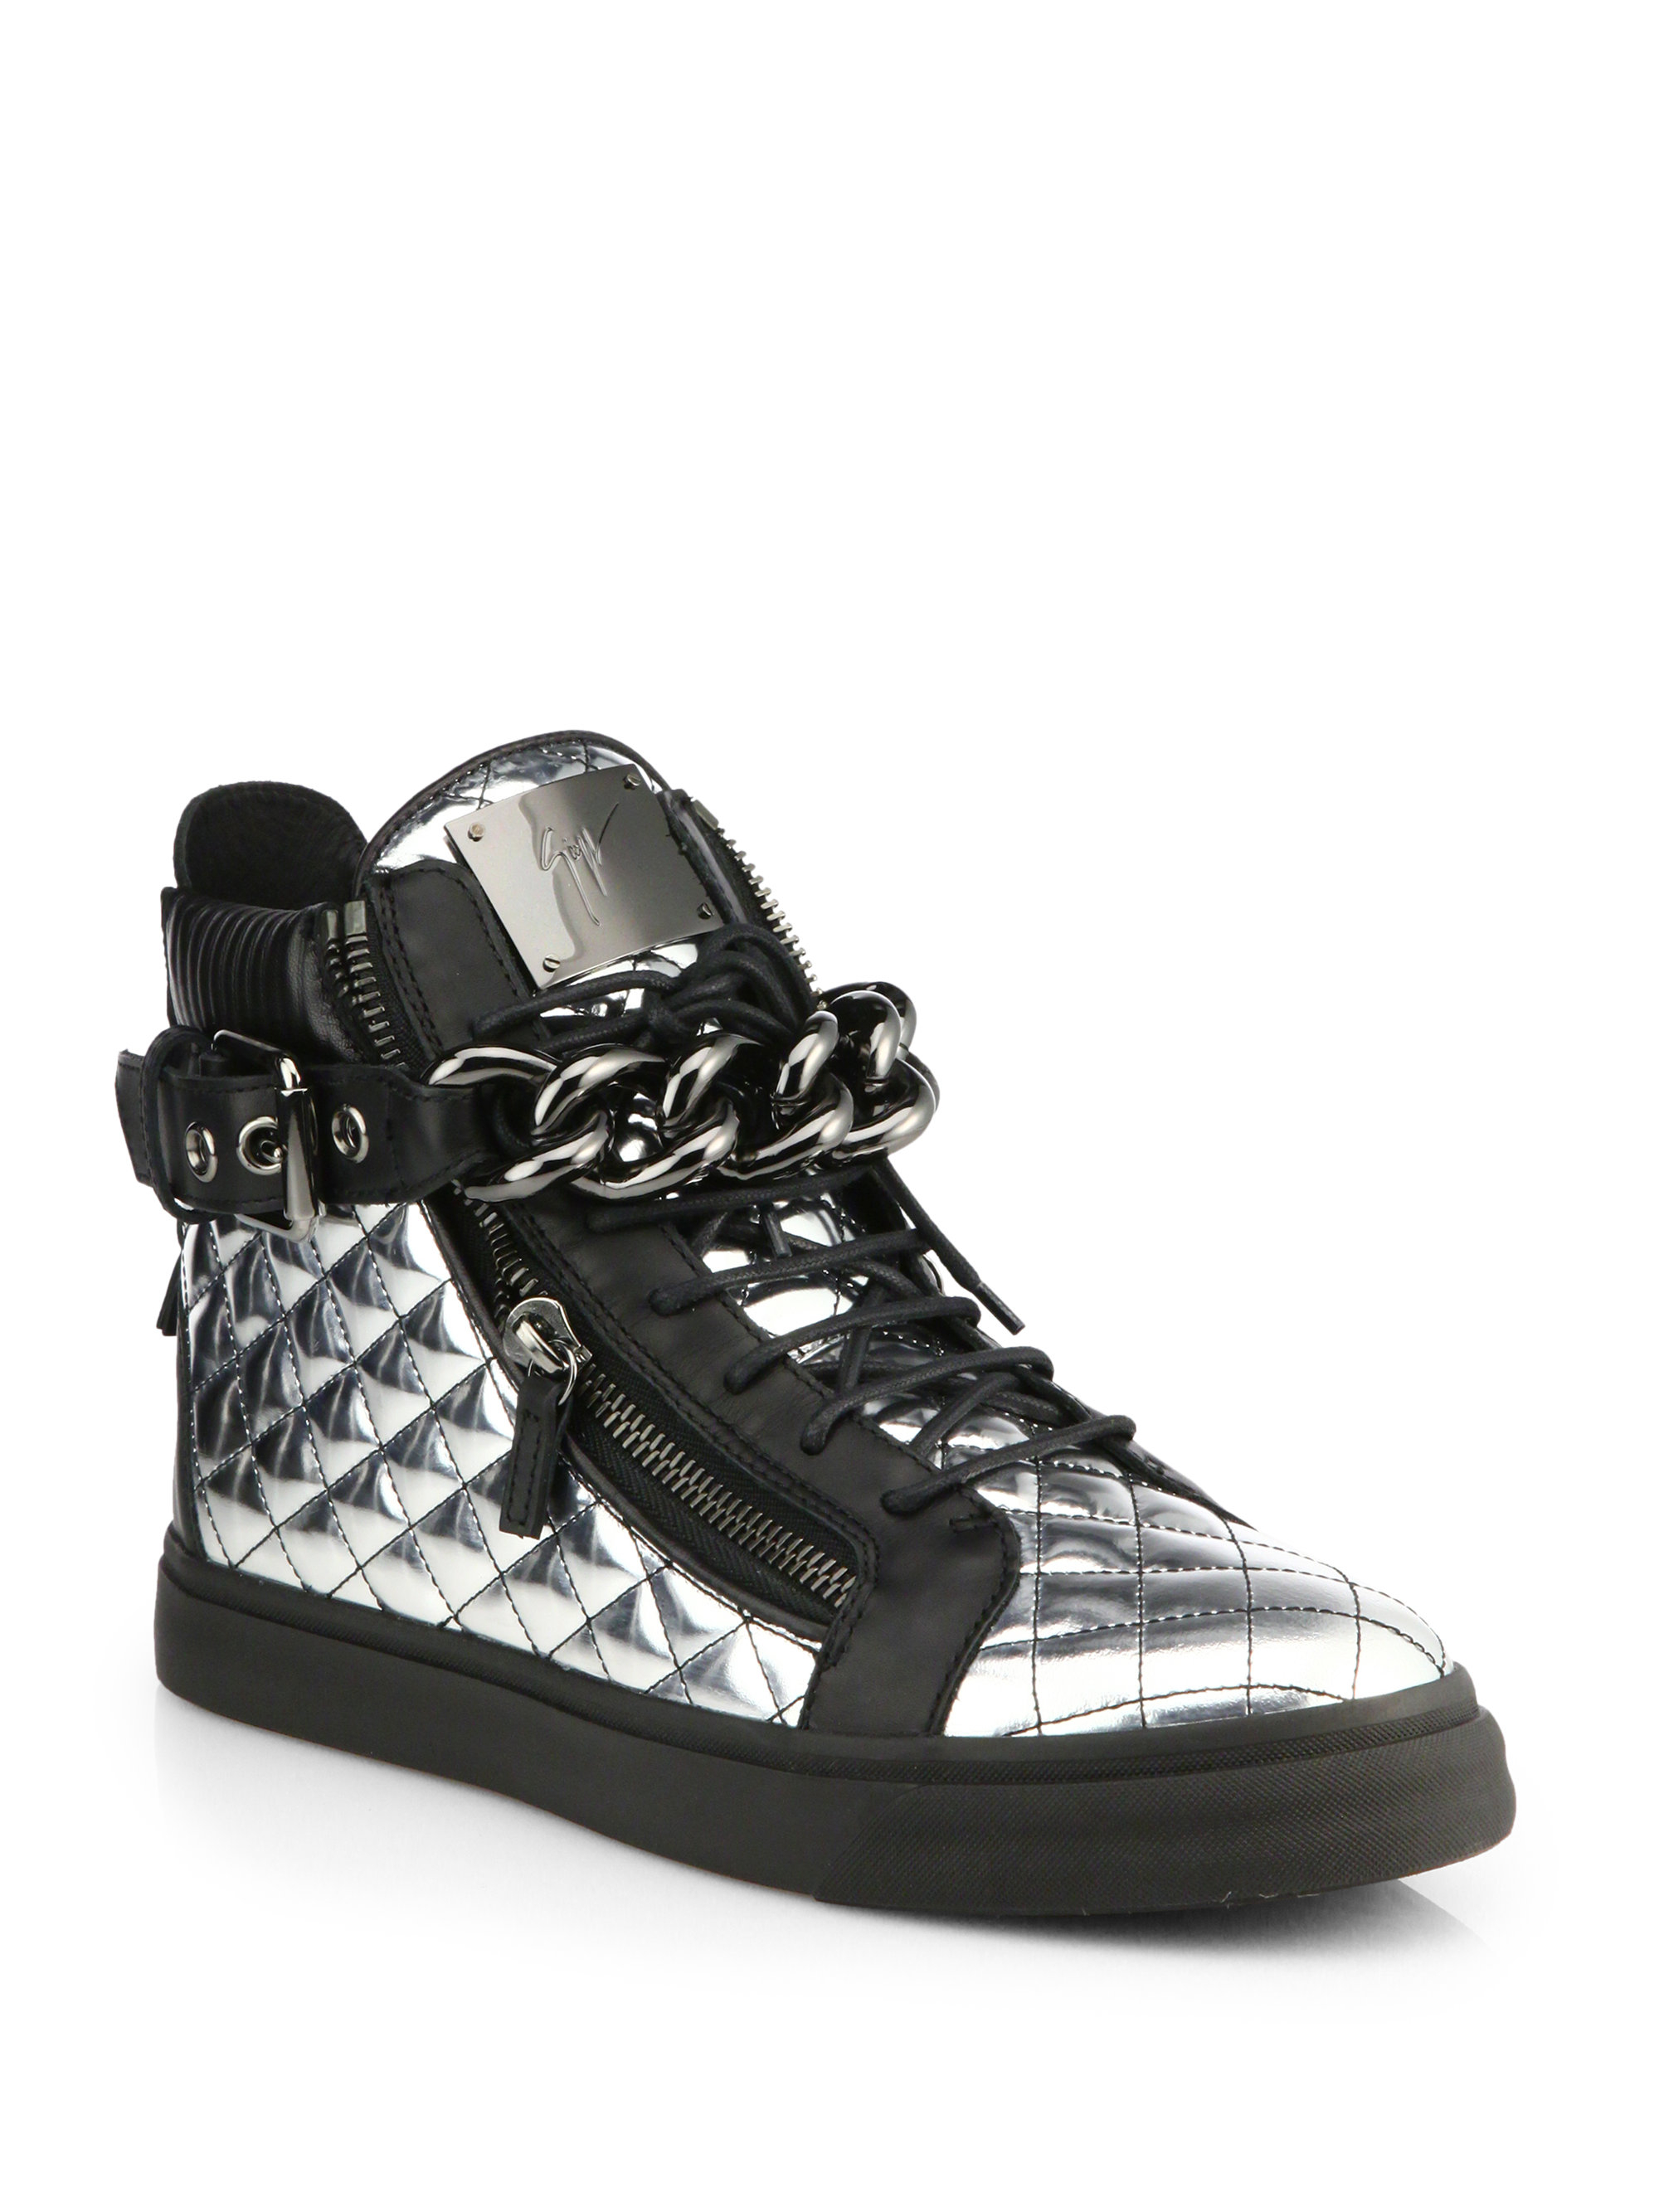 Giuseppe Zanotti Quilted Metallic Leather Chain High-Top Sneakers in ...